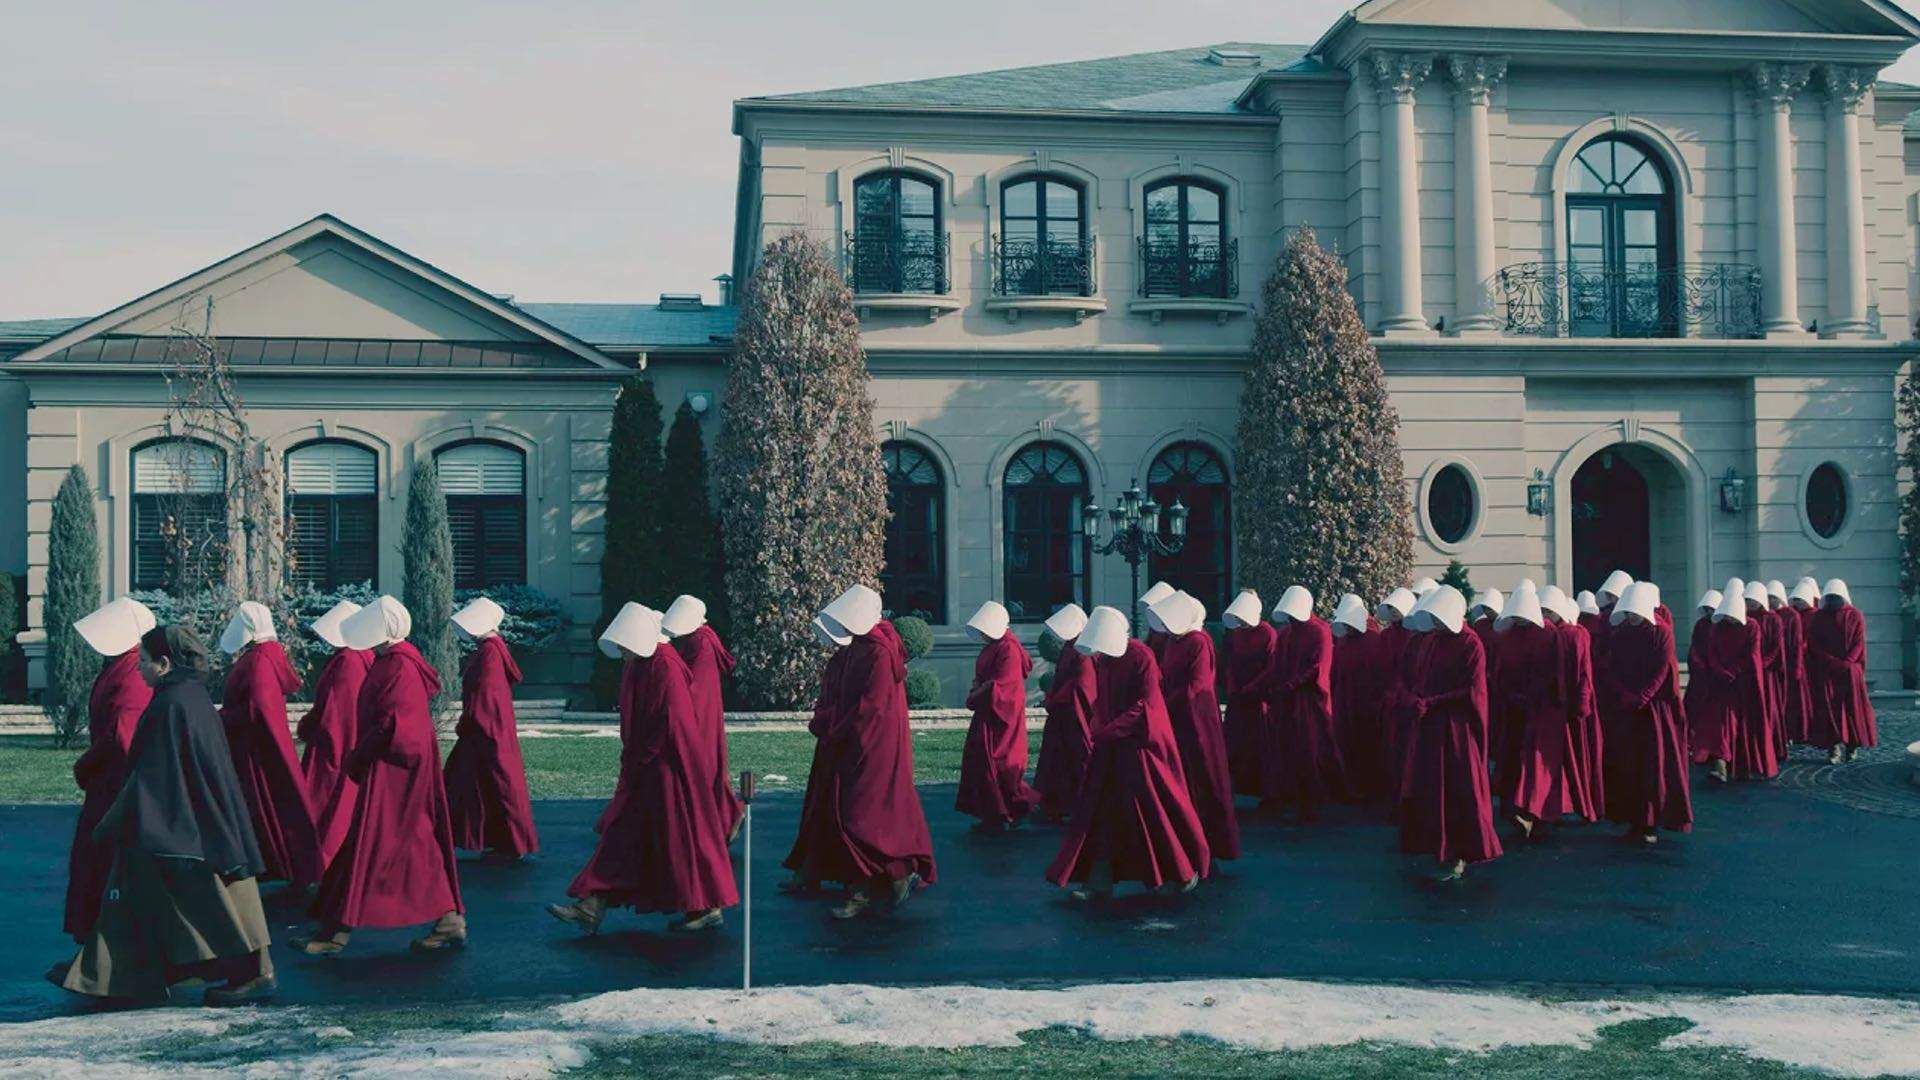 The Handmaids walk past a building in The Handmaid’s Tale